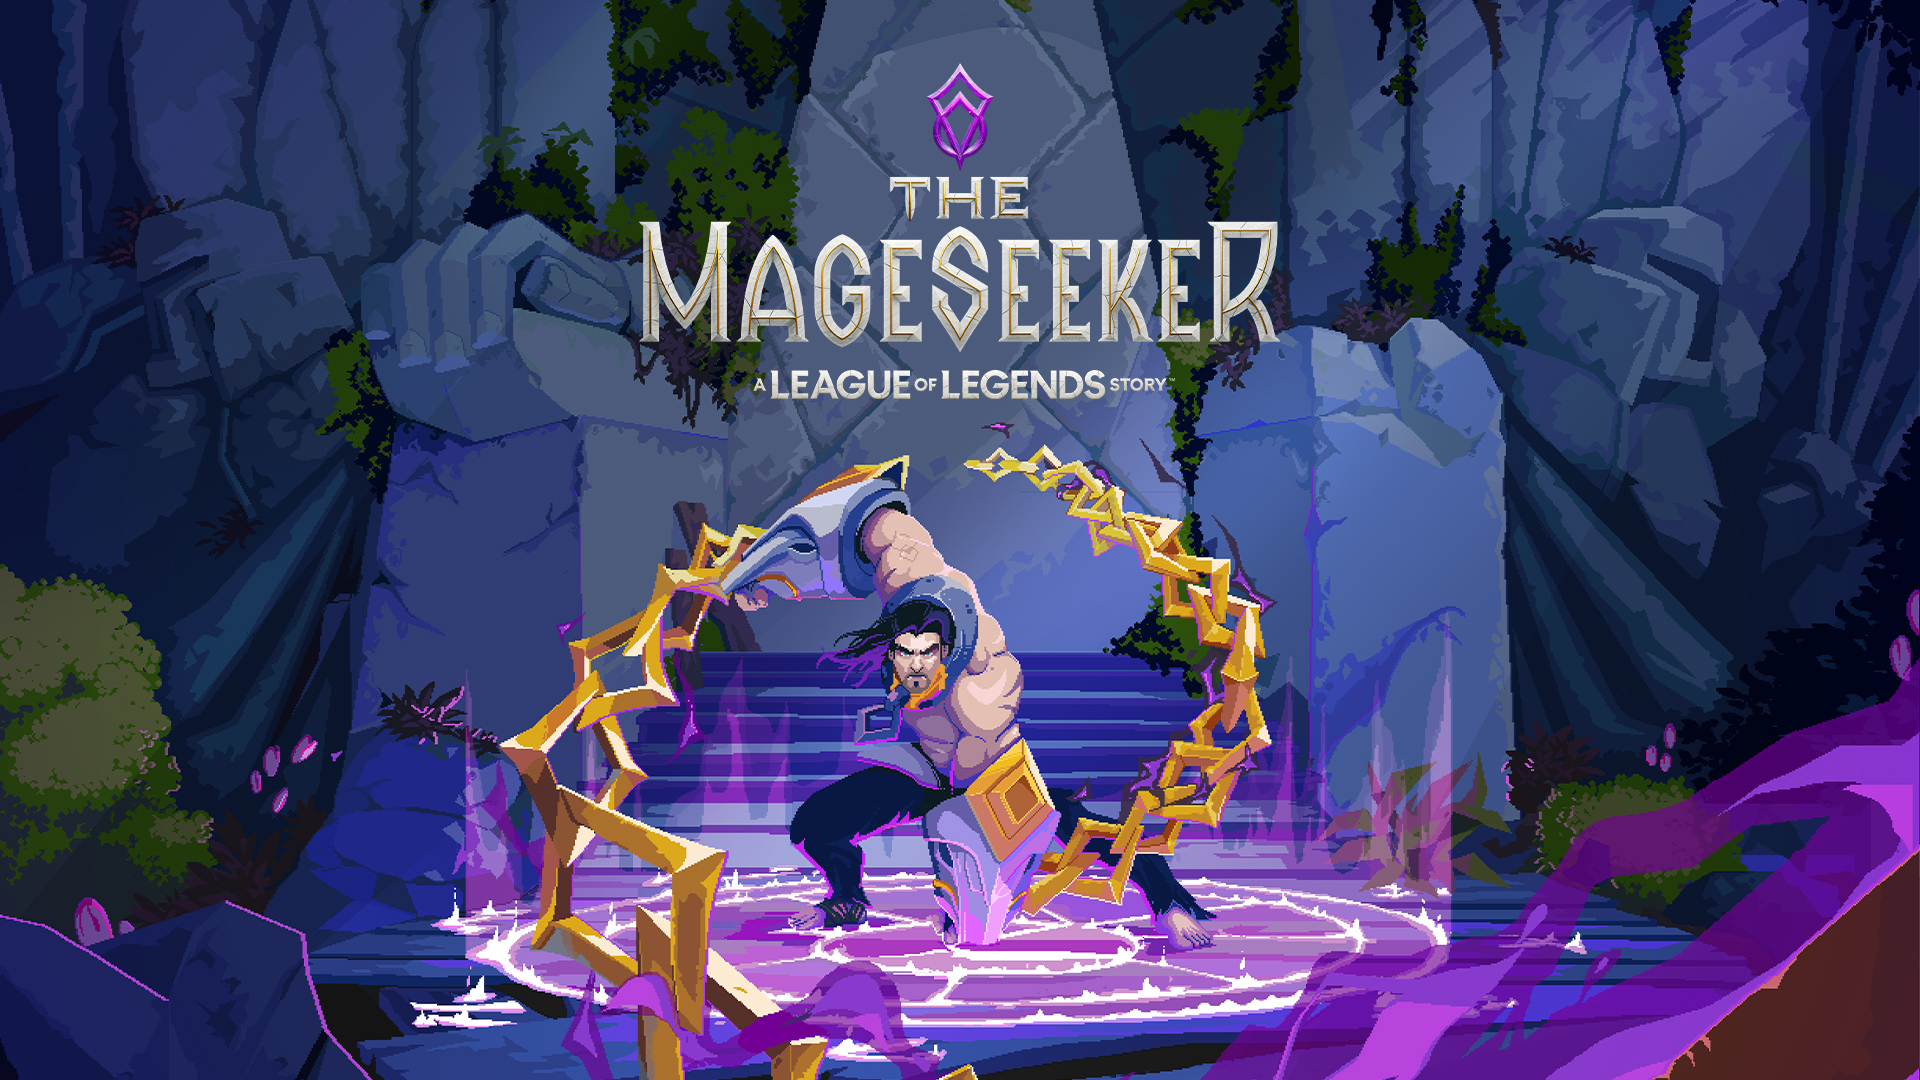 Today we tested The Mageseeker: A League of Legends Story on GR Live